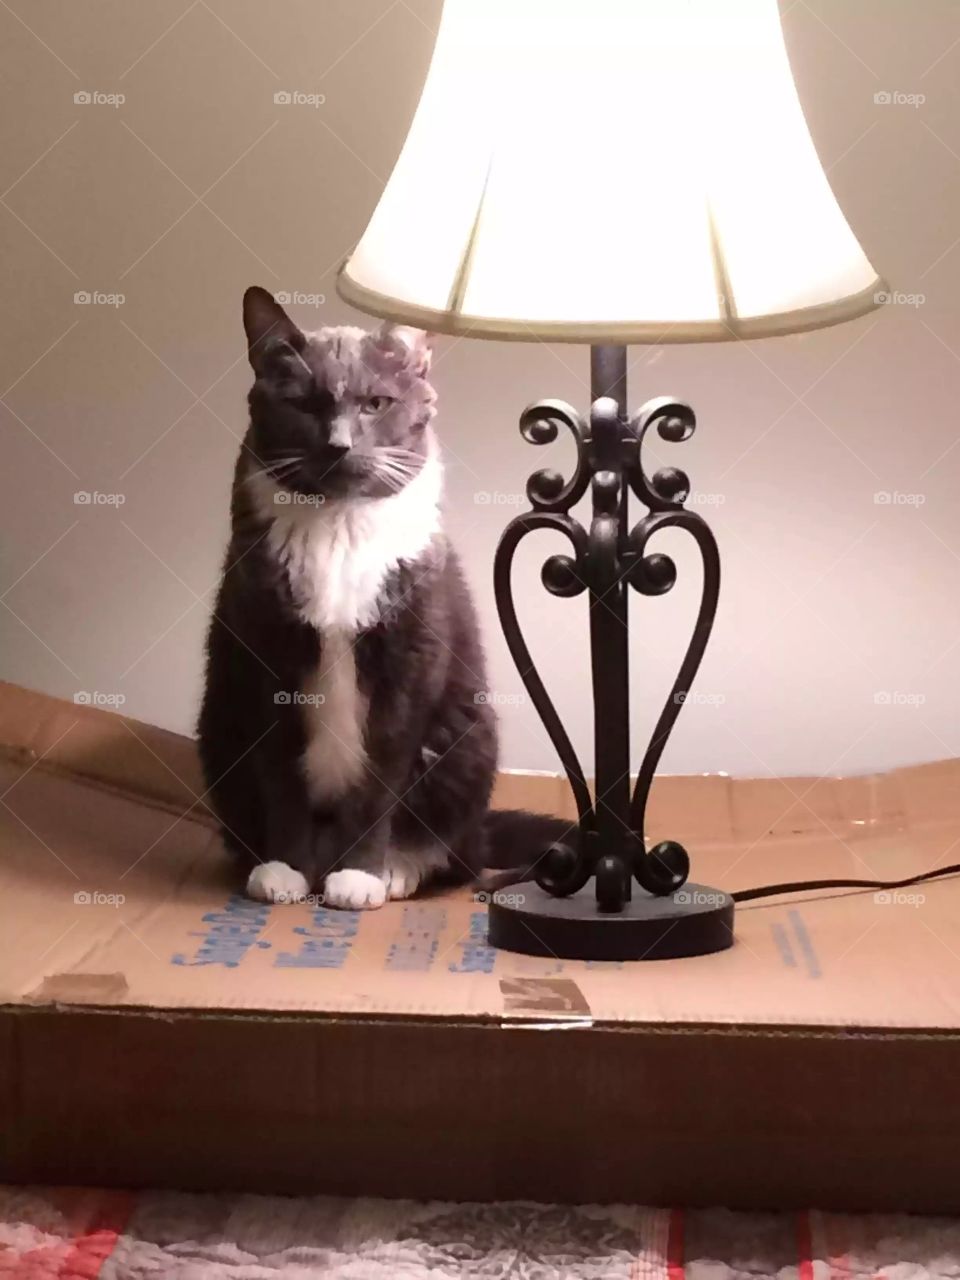 This lamp is mine, get your own! The cat has spoken! 